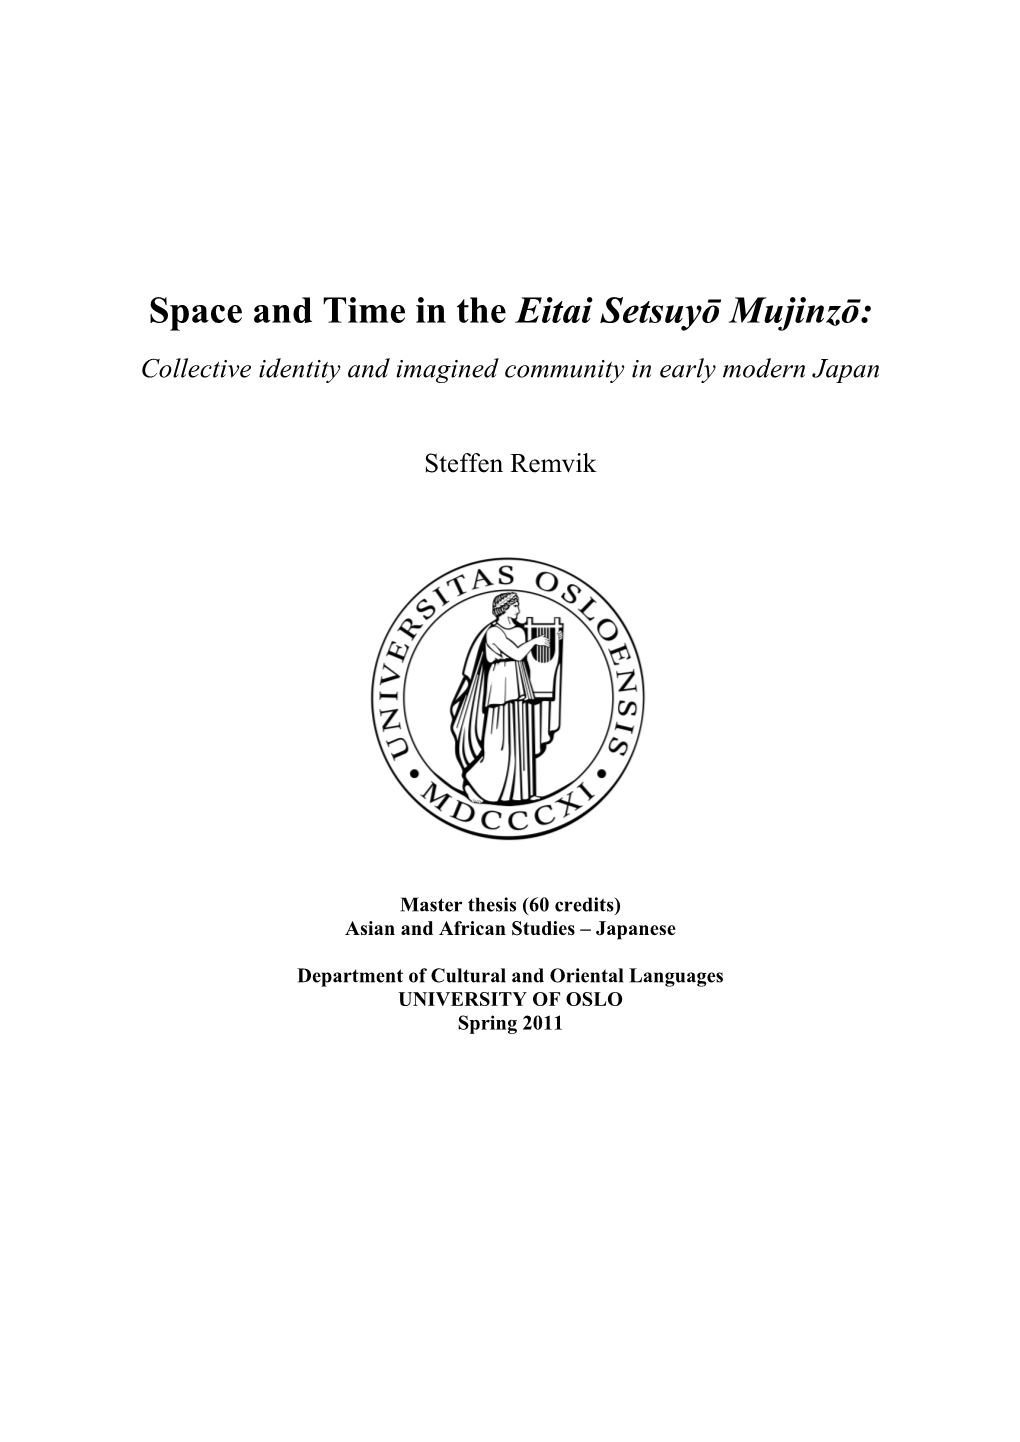 Space and Time in the Eitai Setsuyō Mujinzō: Collective Identity and Imagined Community in Early Modern Japan